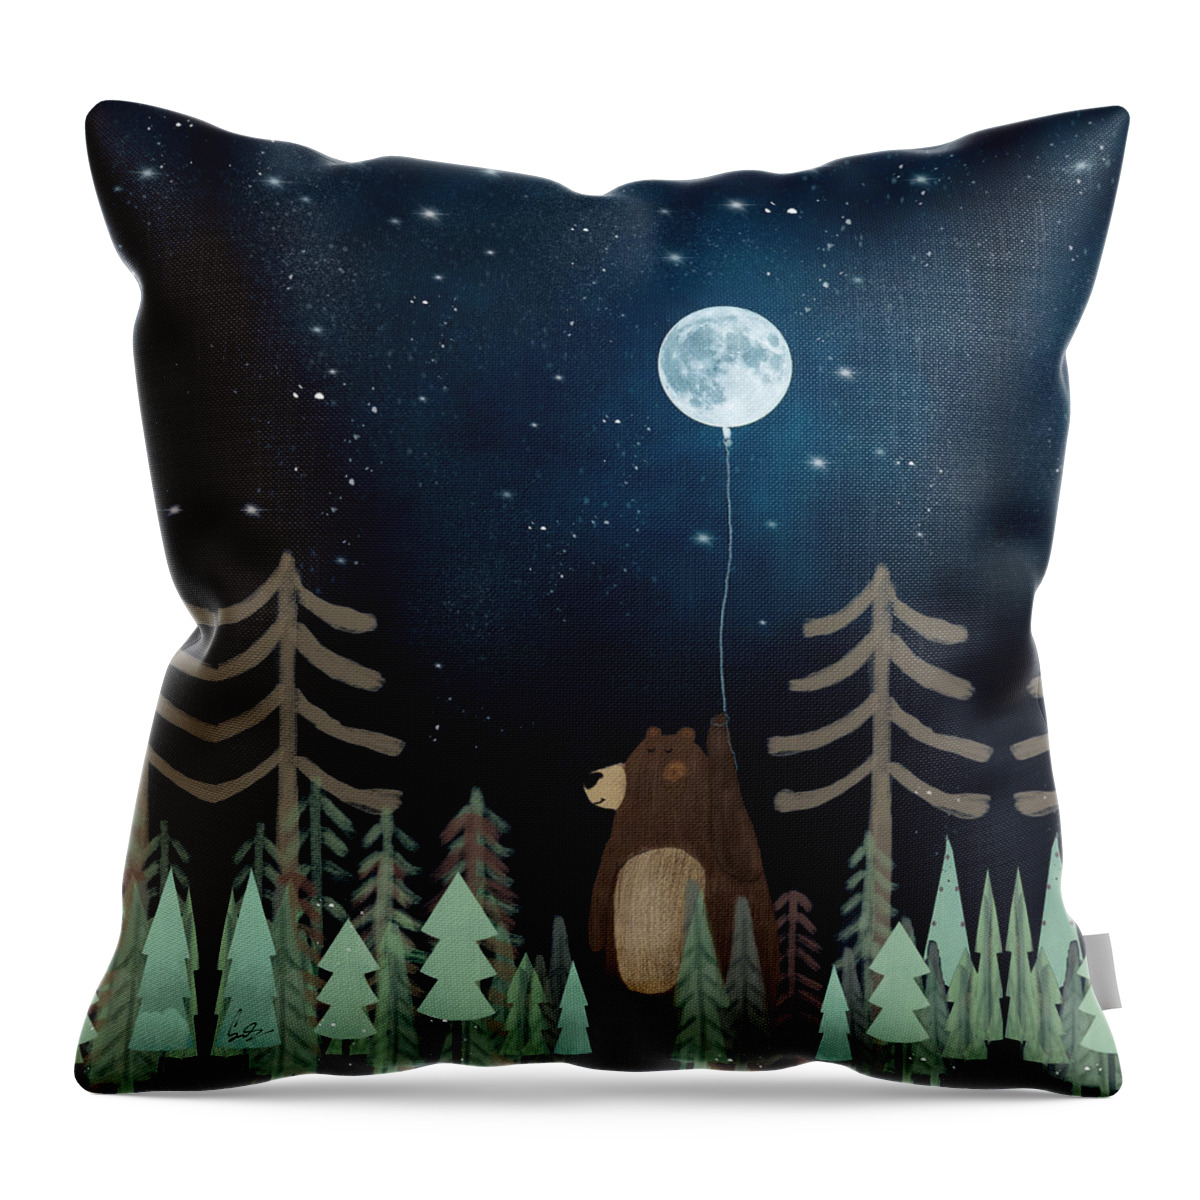 Bears Throw Pillow featuring the painting The Moon Balloon by Bri Buckley